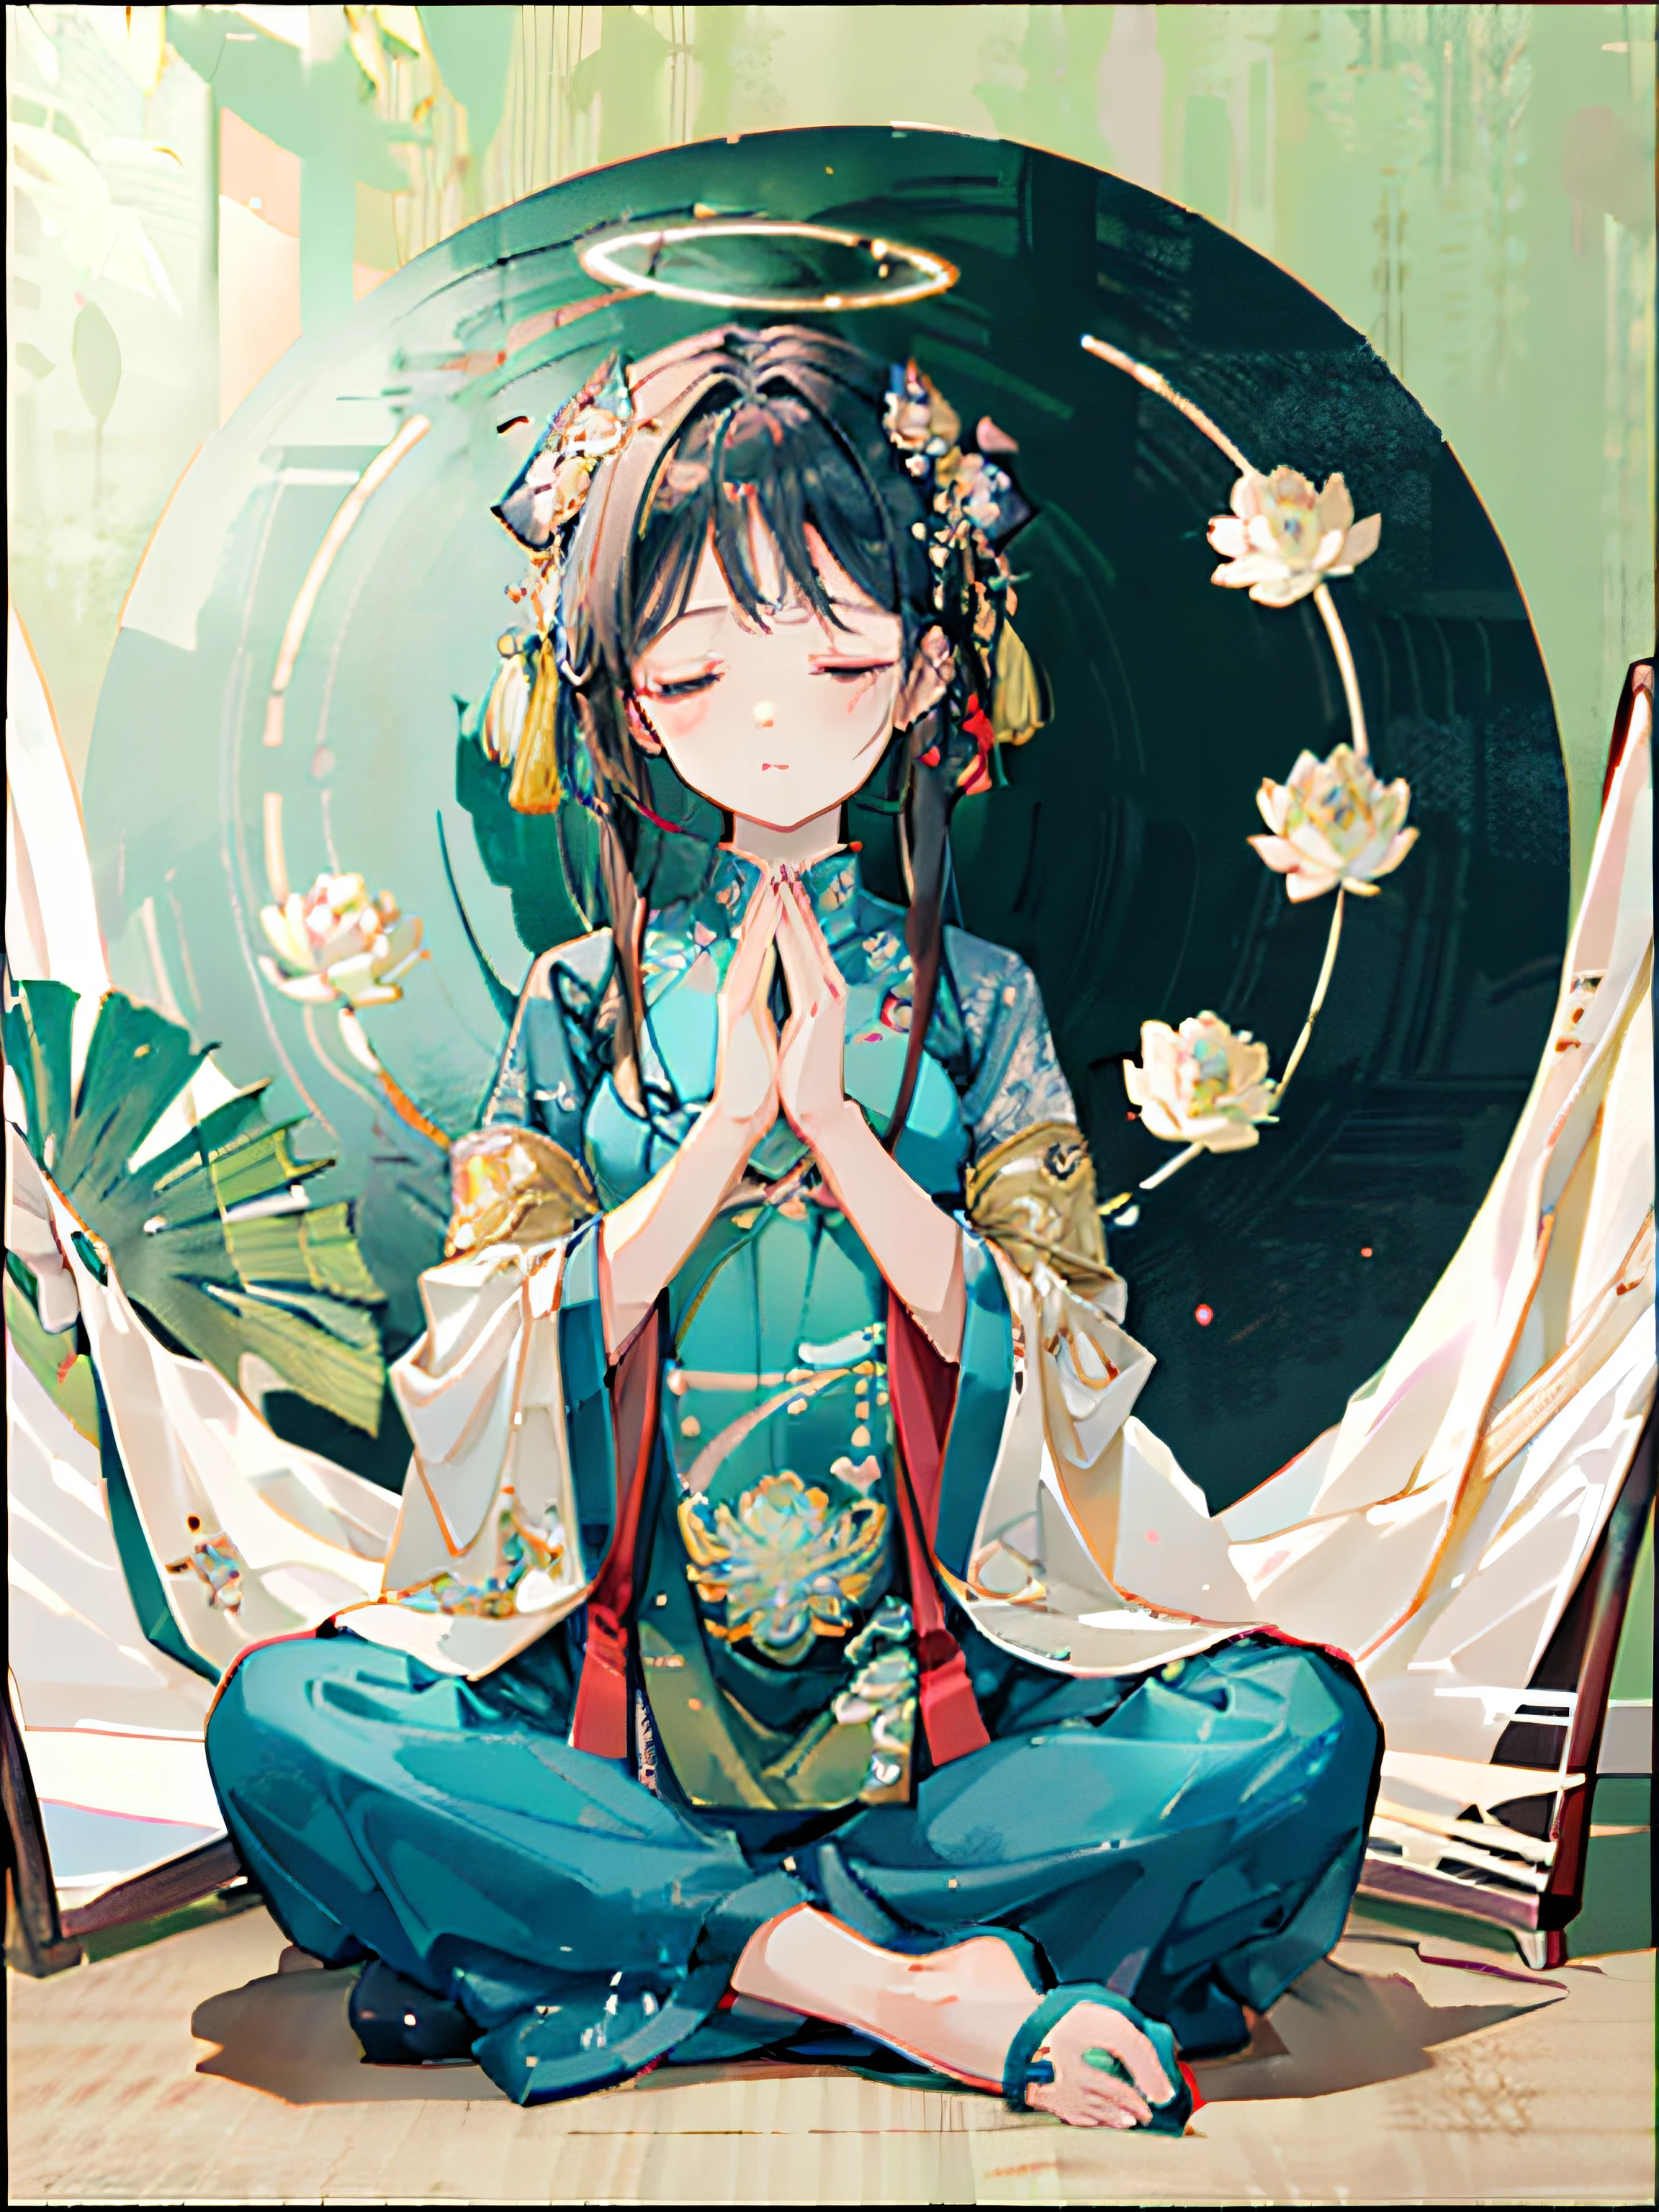 best quality, official art, beautiful and aesthetic:1.2), extreme detailed, a girl, 3 years old, Put her hands together, praying,  head down, Sit crosslegged, Meditate with your eyes closed, a lotus, dressed in chinese clothes, the painting style refers to qi baishi, xu beihong, God rays, Halo, Rim light, frontal forward, symmetrical composition, tang dynasty, charming characters, cute and dreamy